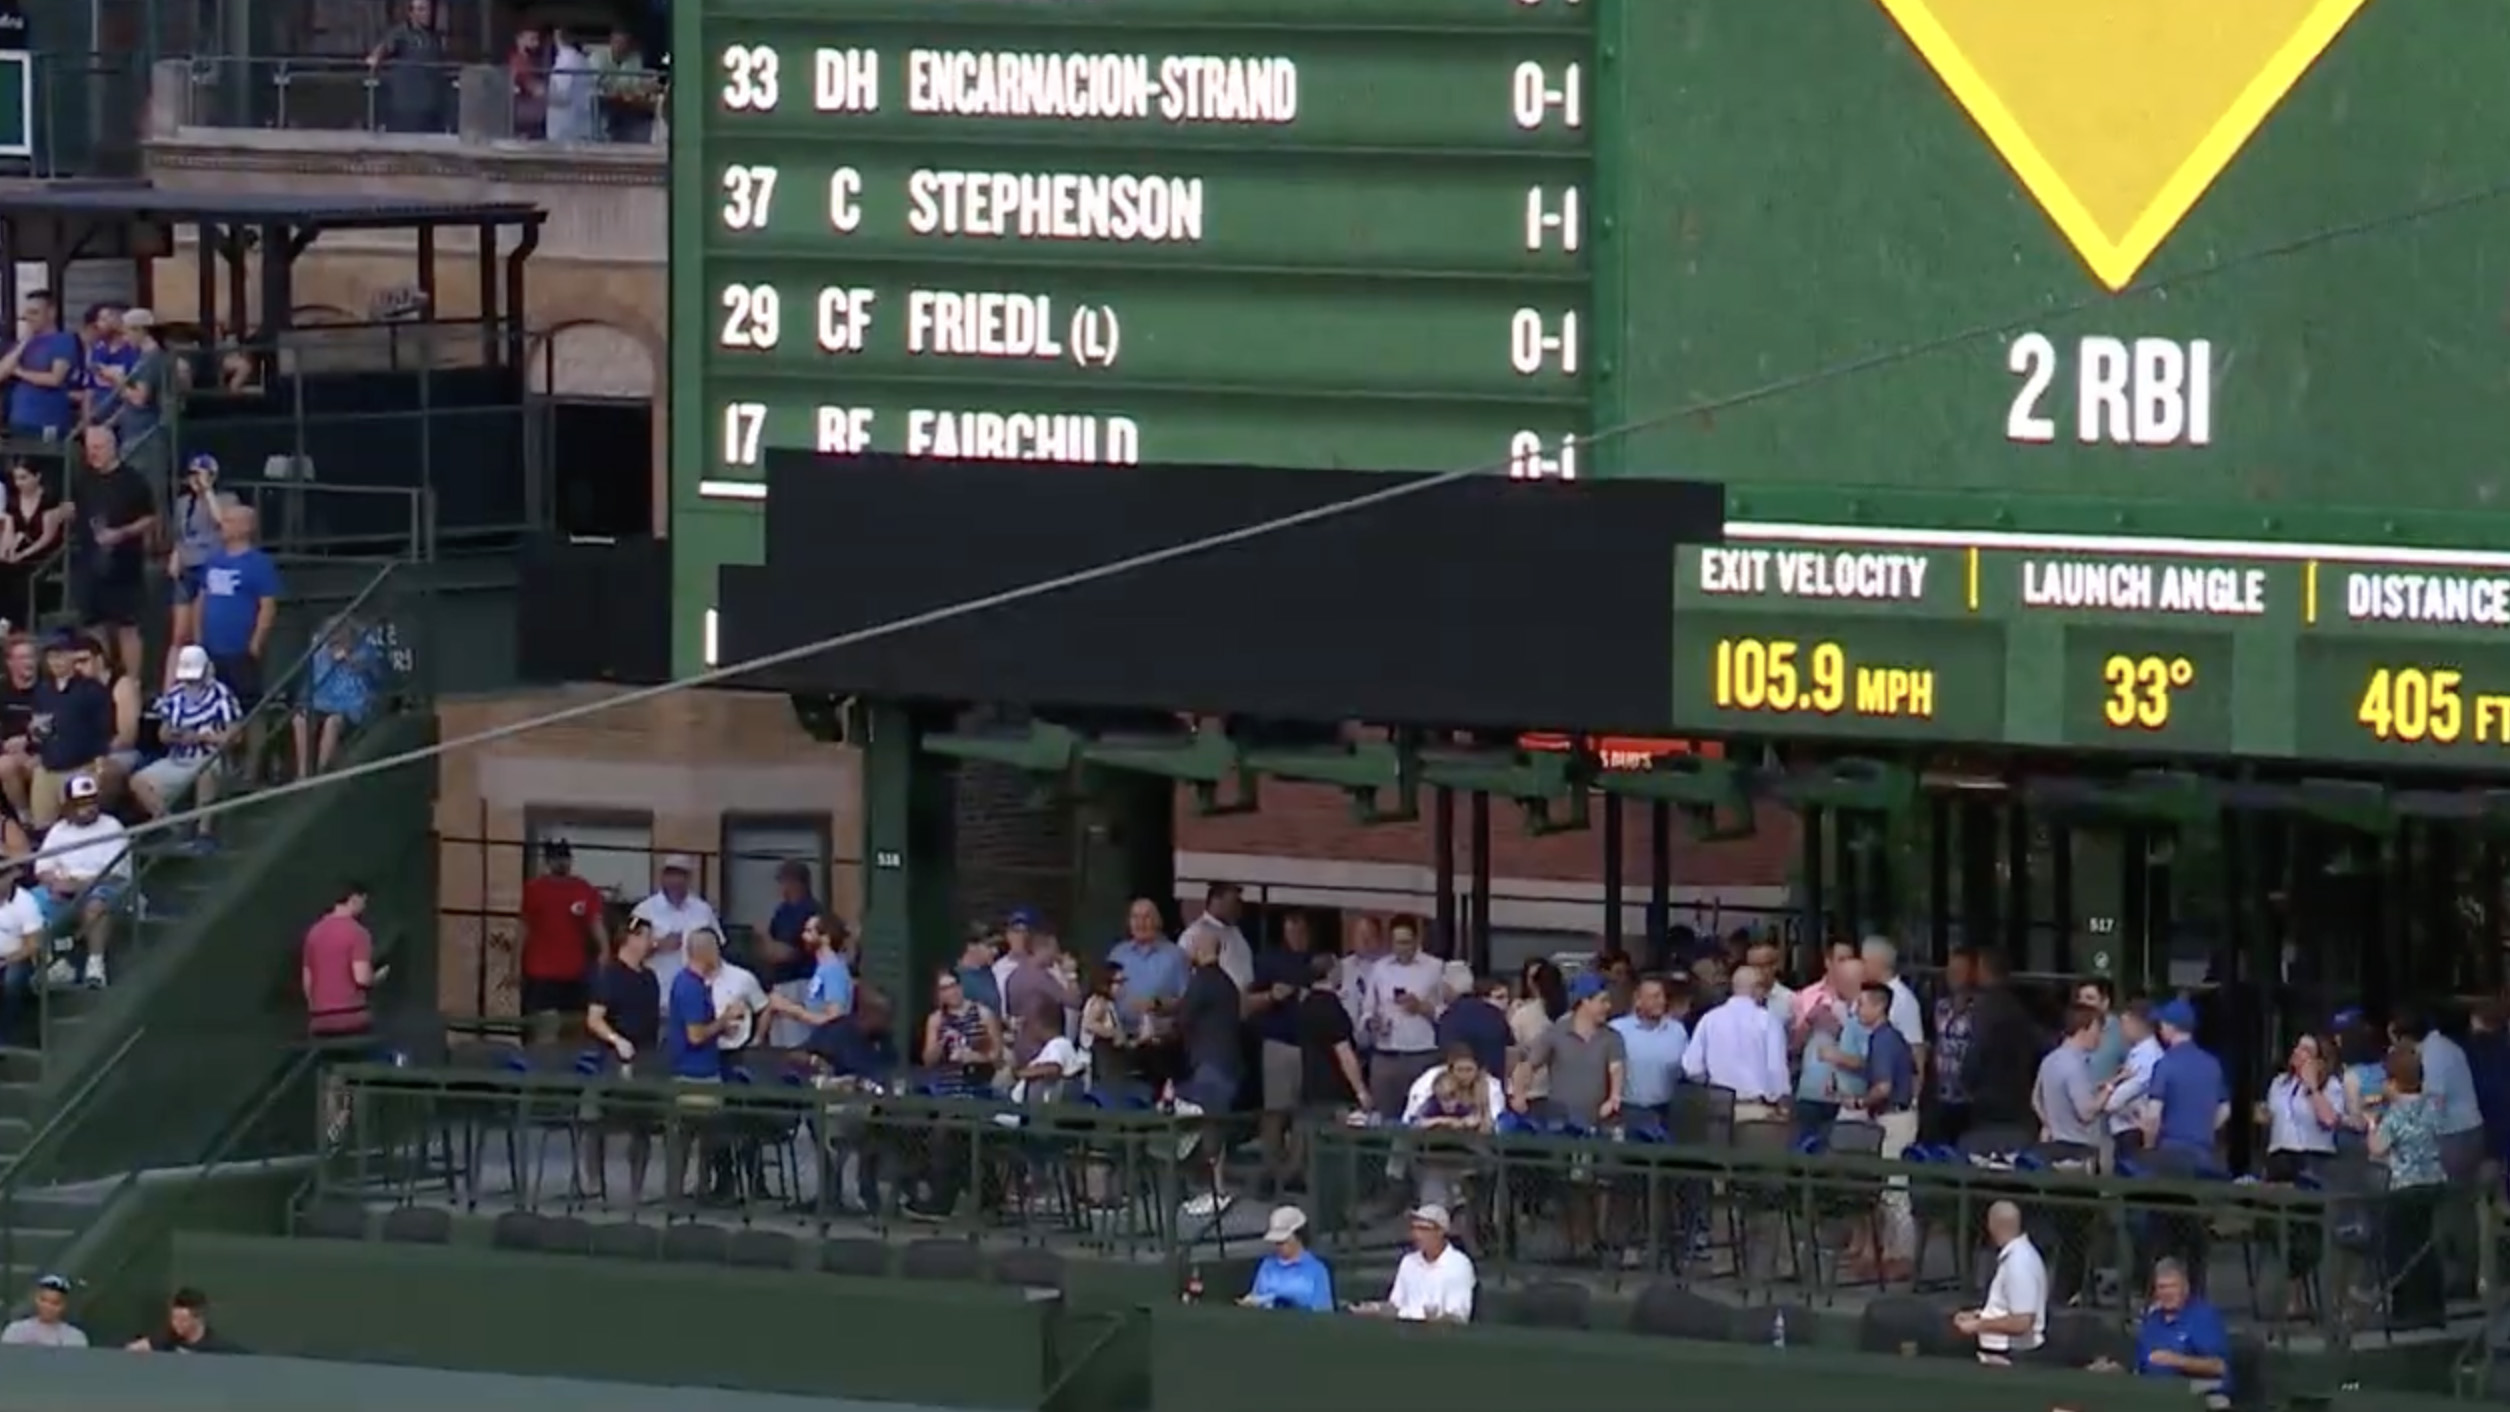 Monday's scoreboard malfunction at Wrigley Field was a reminder — despite  the well-received renovation — of what we love about the park